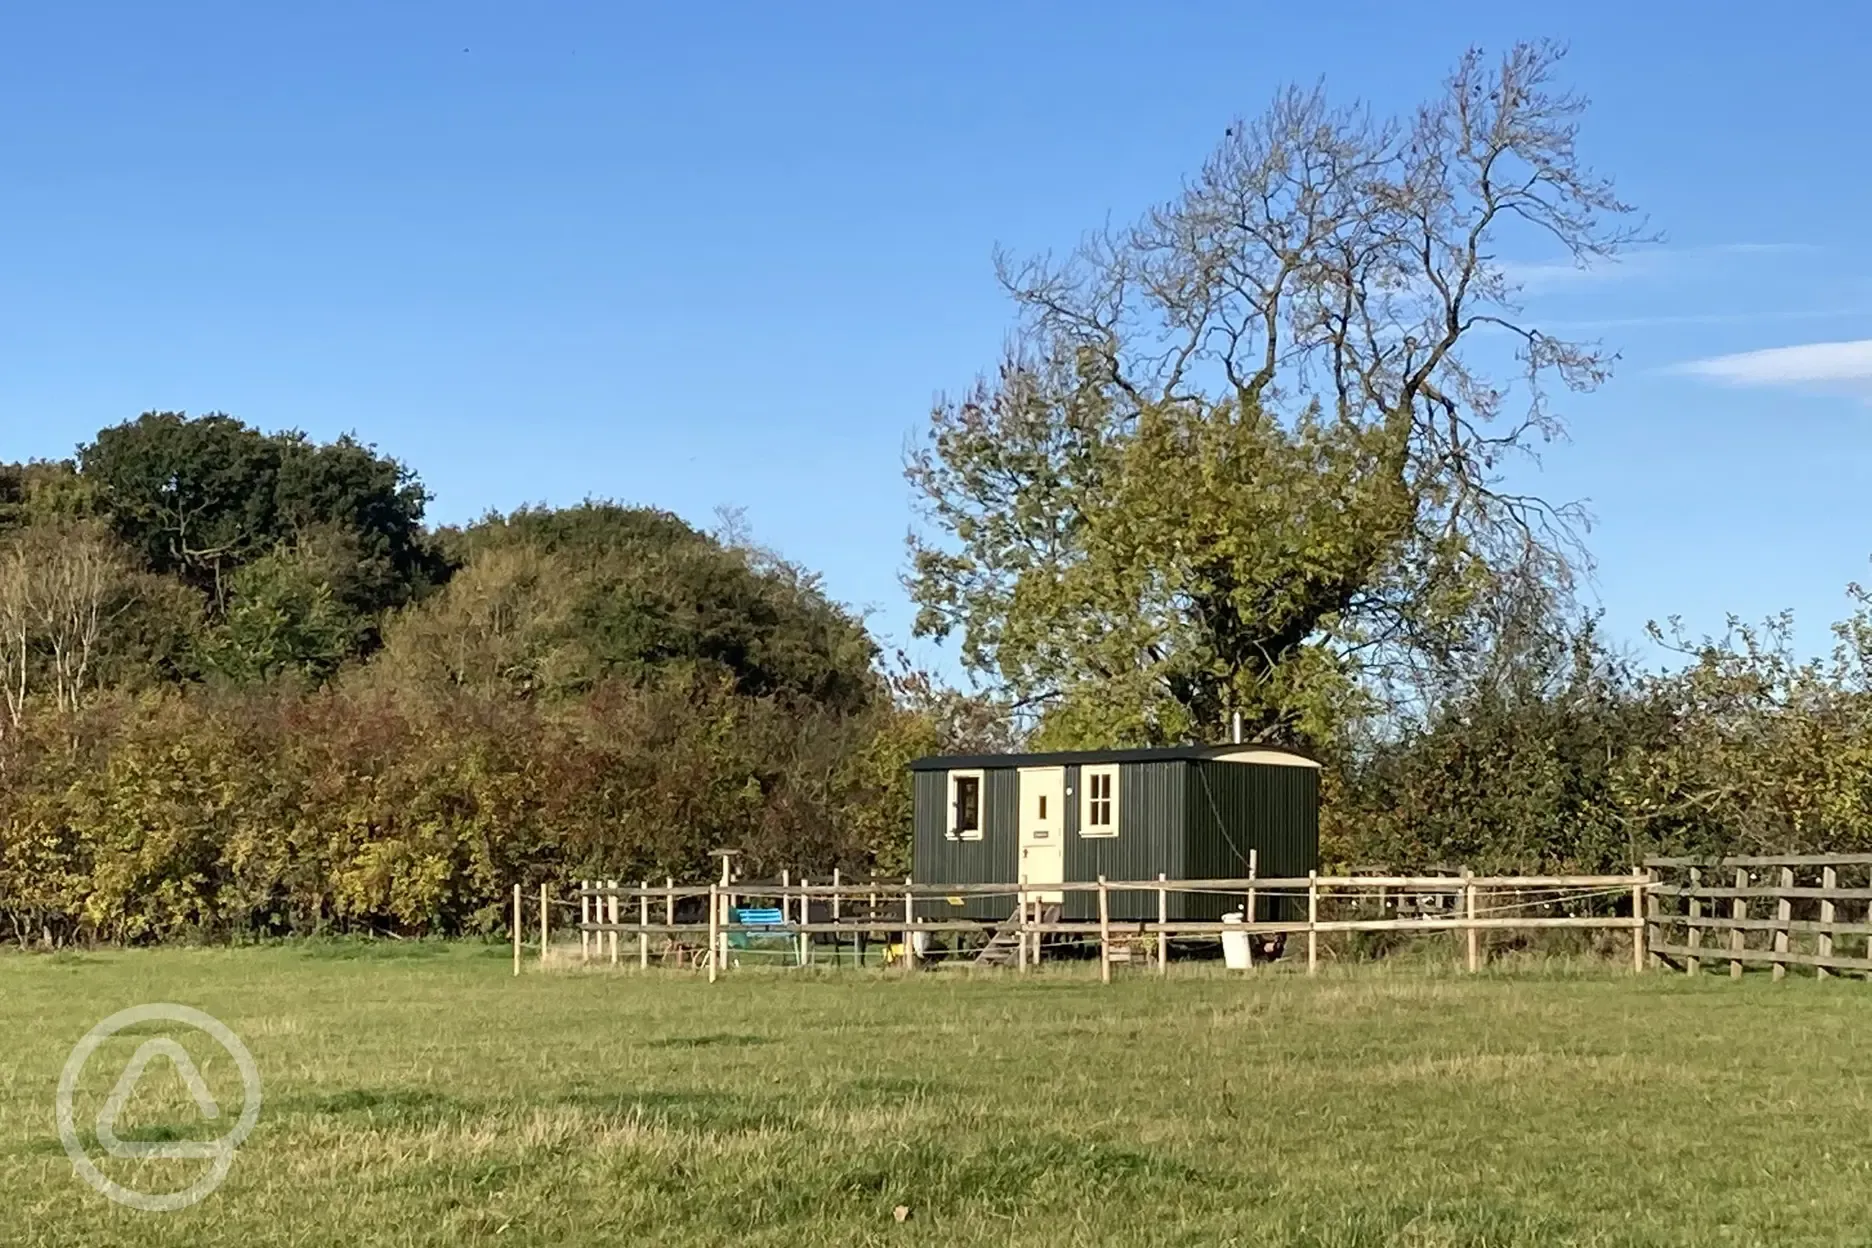 Paddock View hut overlooking the horse fields